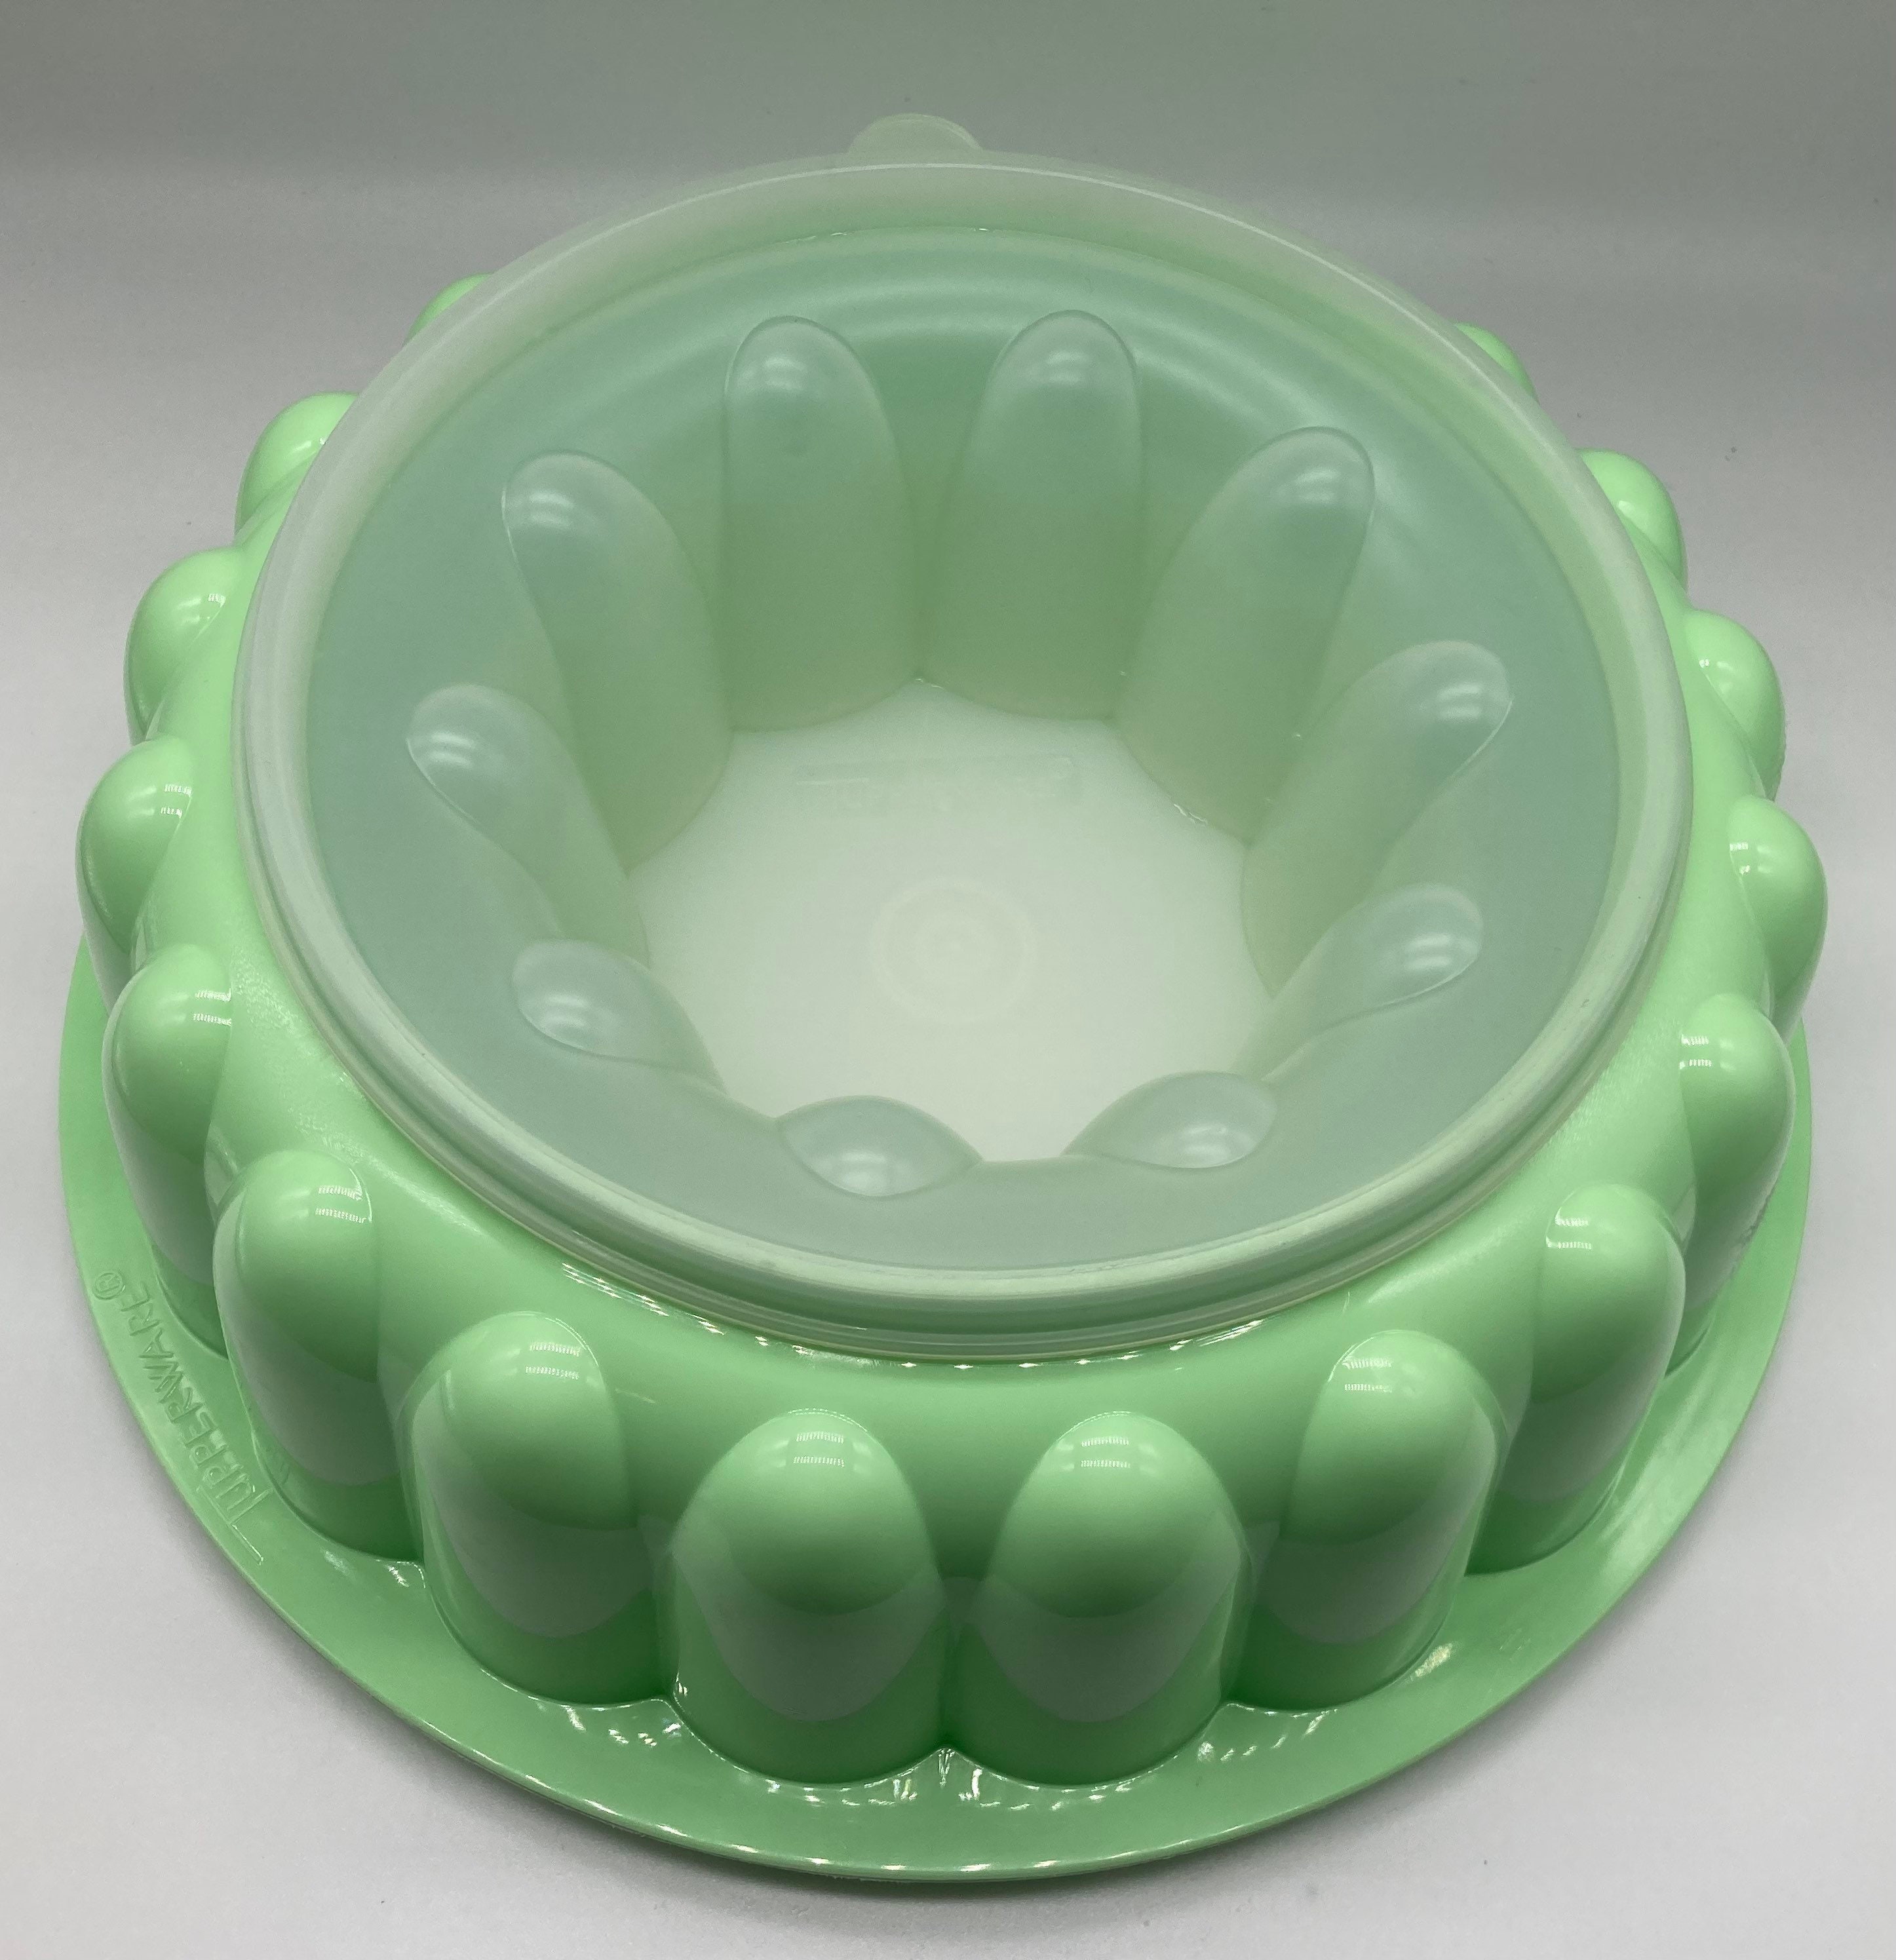 Lot of 10: Assorted JELLO Jiggler molds: Easter, Halloween and general